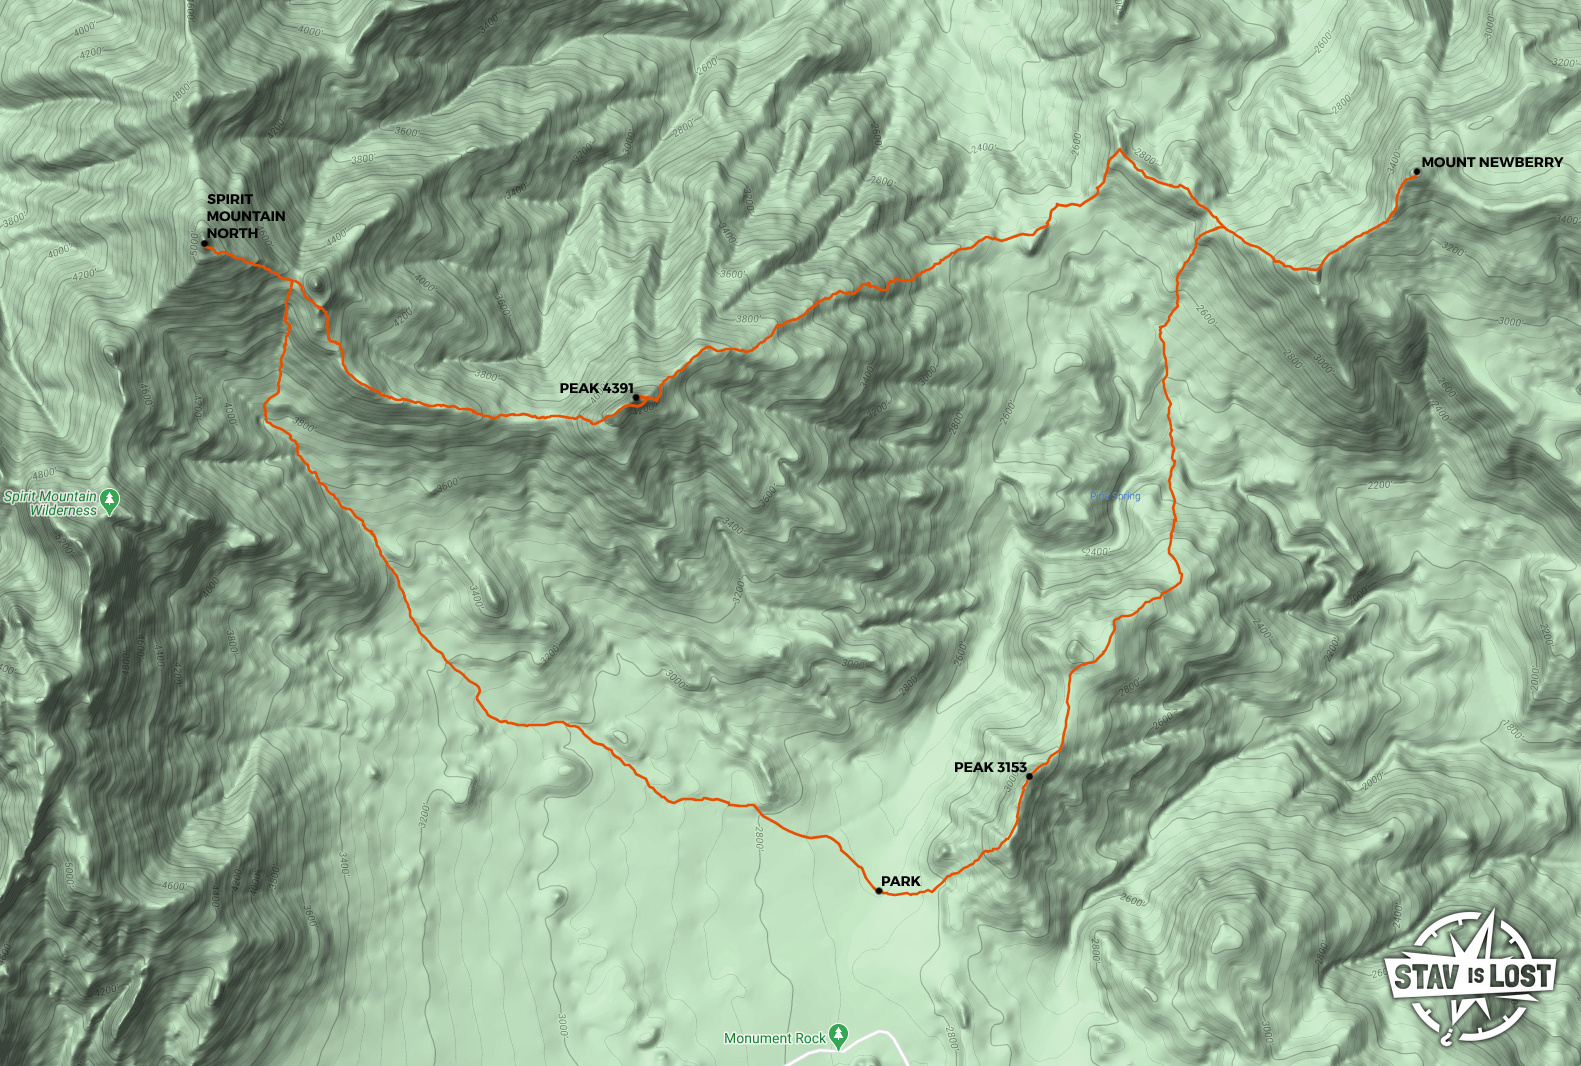 map for Spirit Mountain North and Newberry Mountains Loop by stav is lost